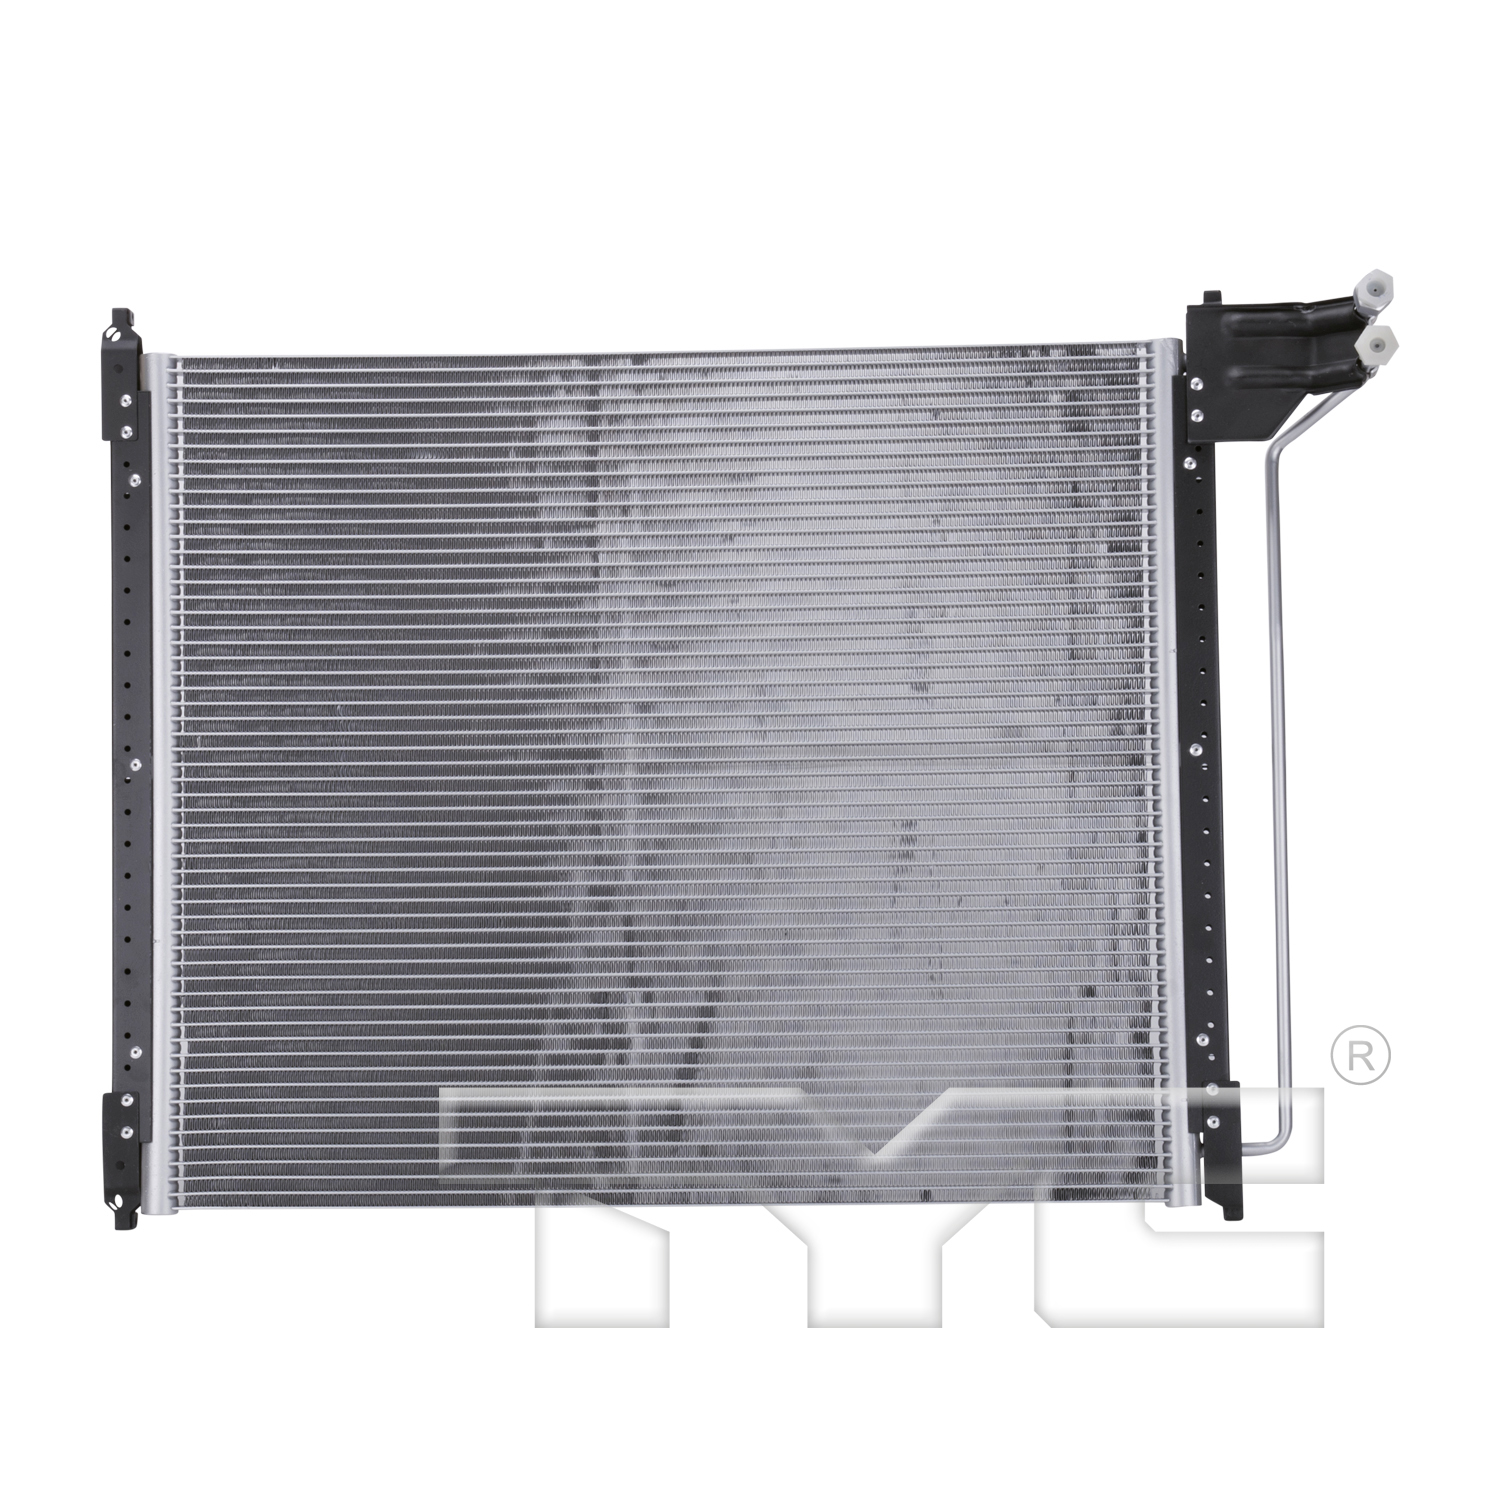 Aftermarket AC CONDENSERS for FORD - E-450 SUPER DUTY, E-450 SUPER DUTY,03-03,Air conditioning condenser